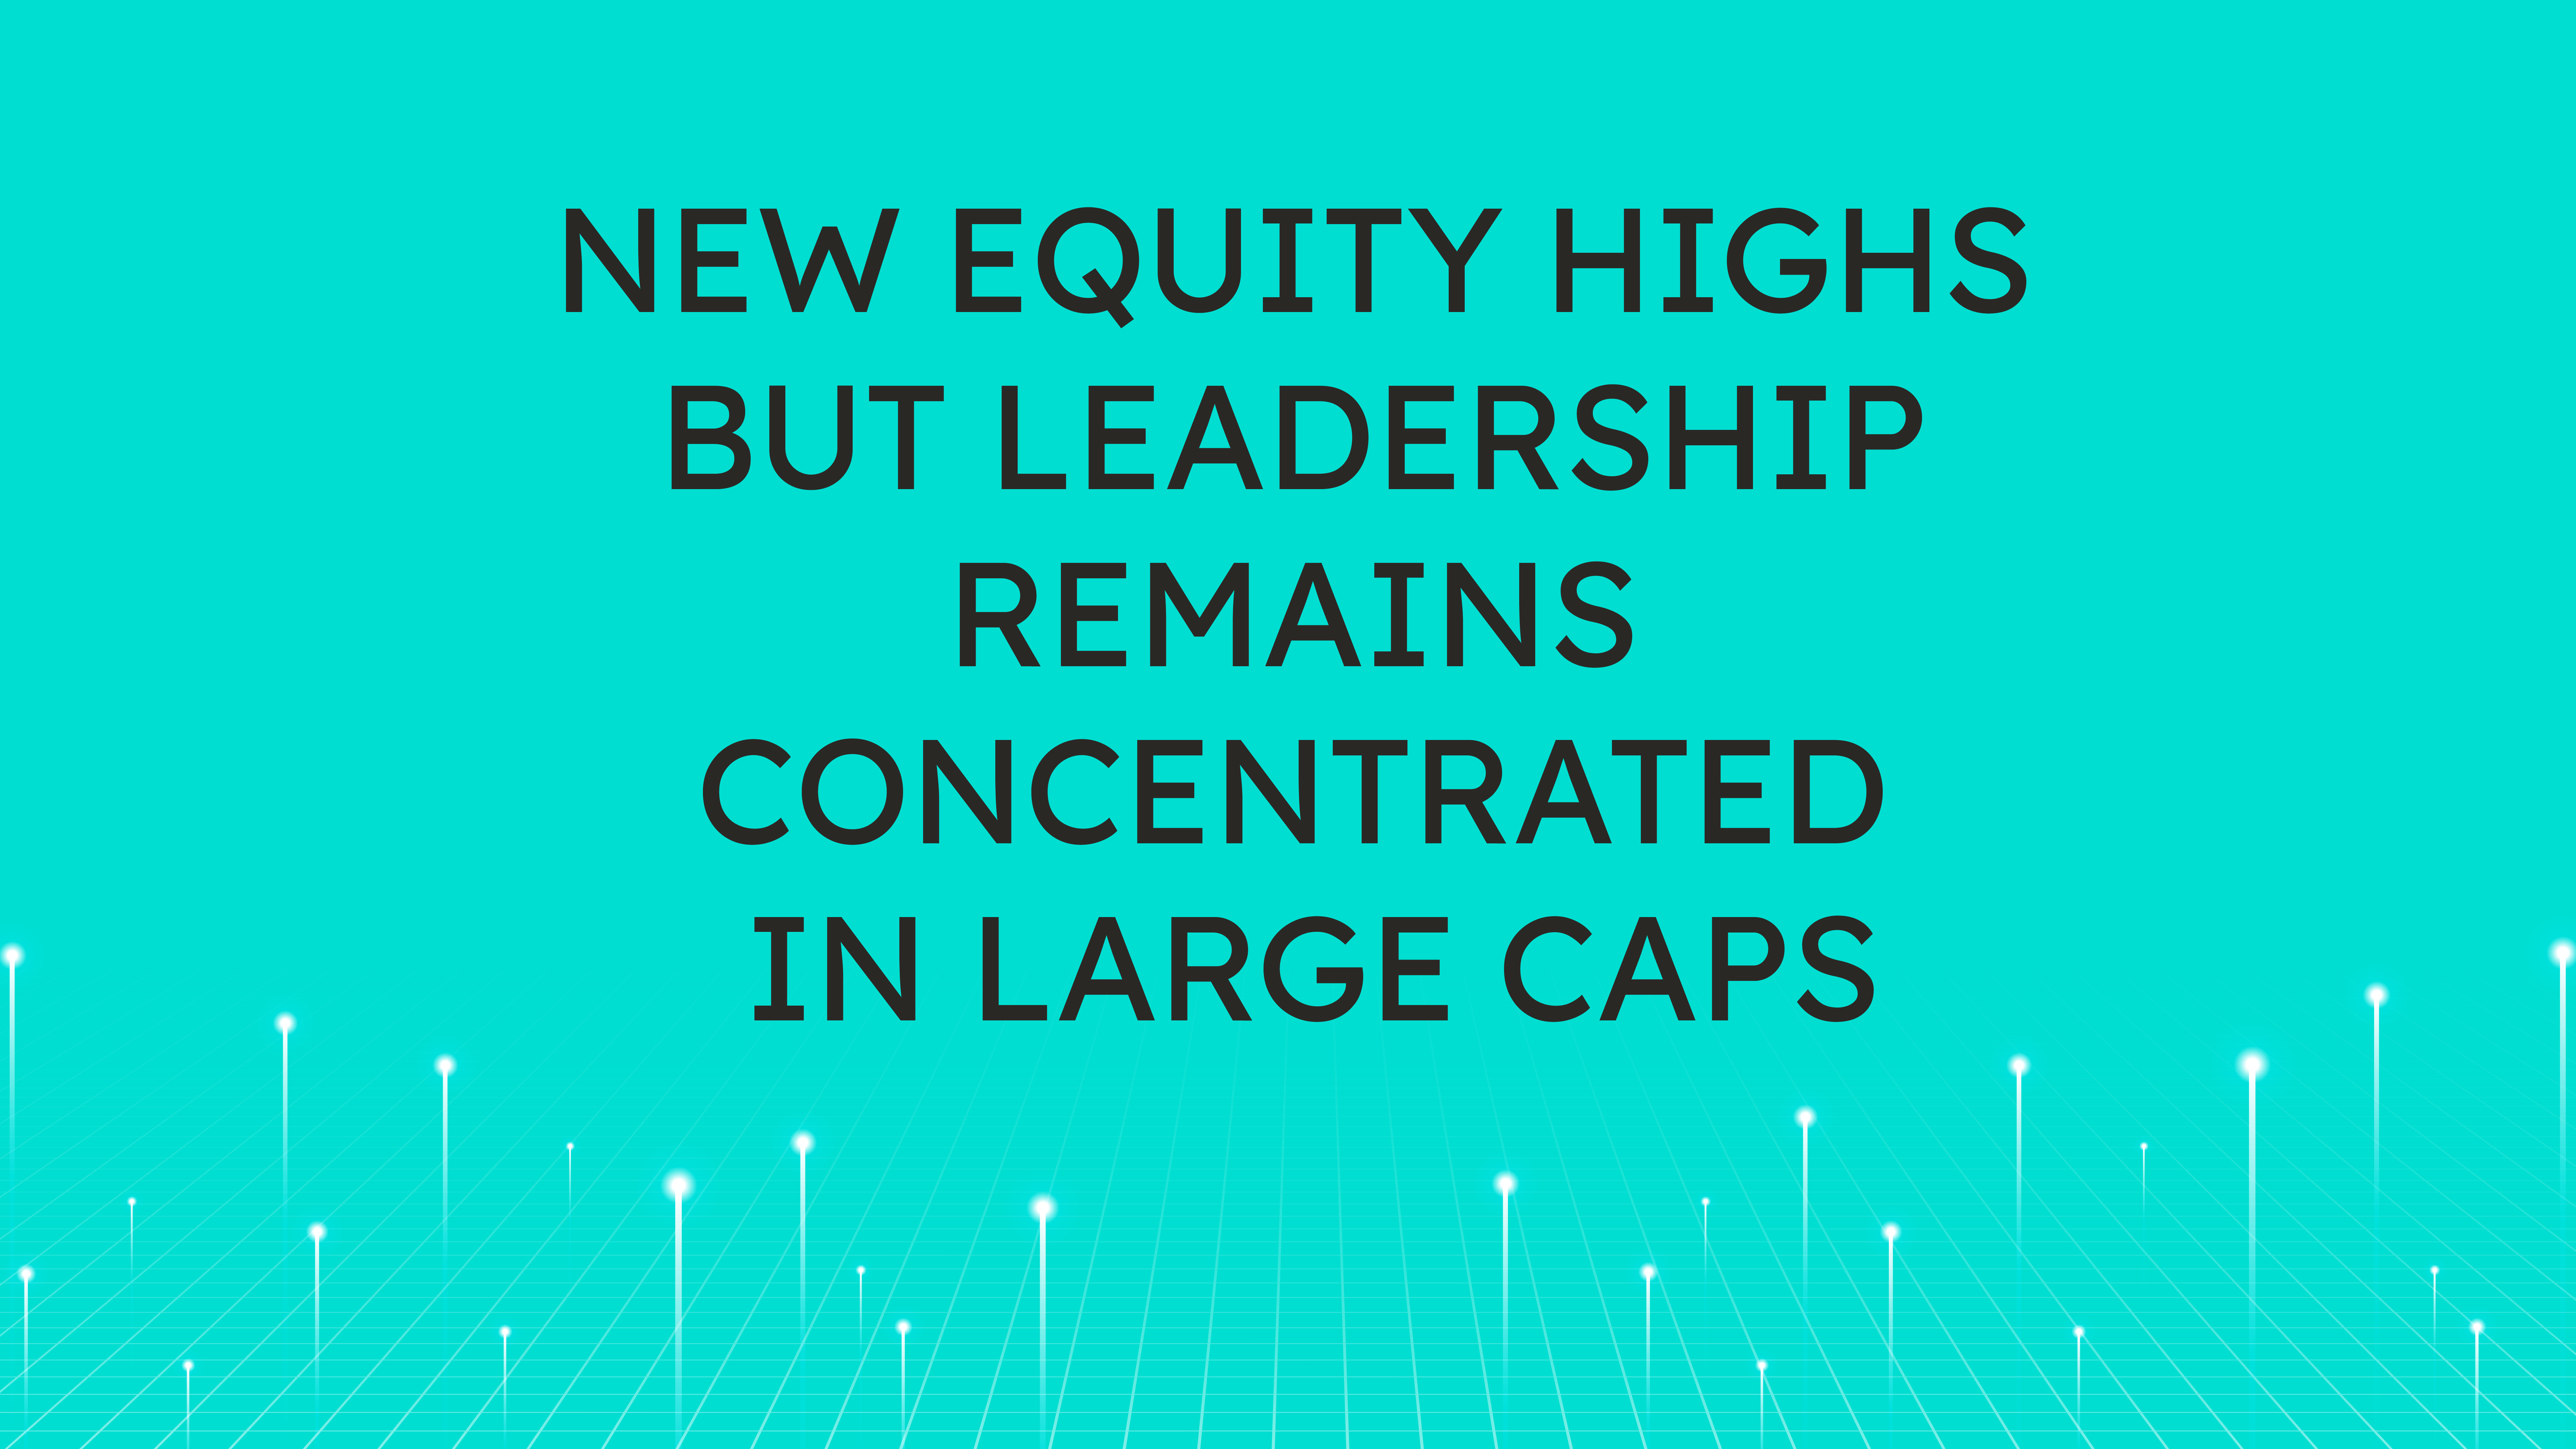 New Equity Highs but Leadership Remains Concentrated in Large Caps